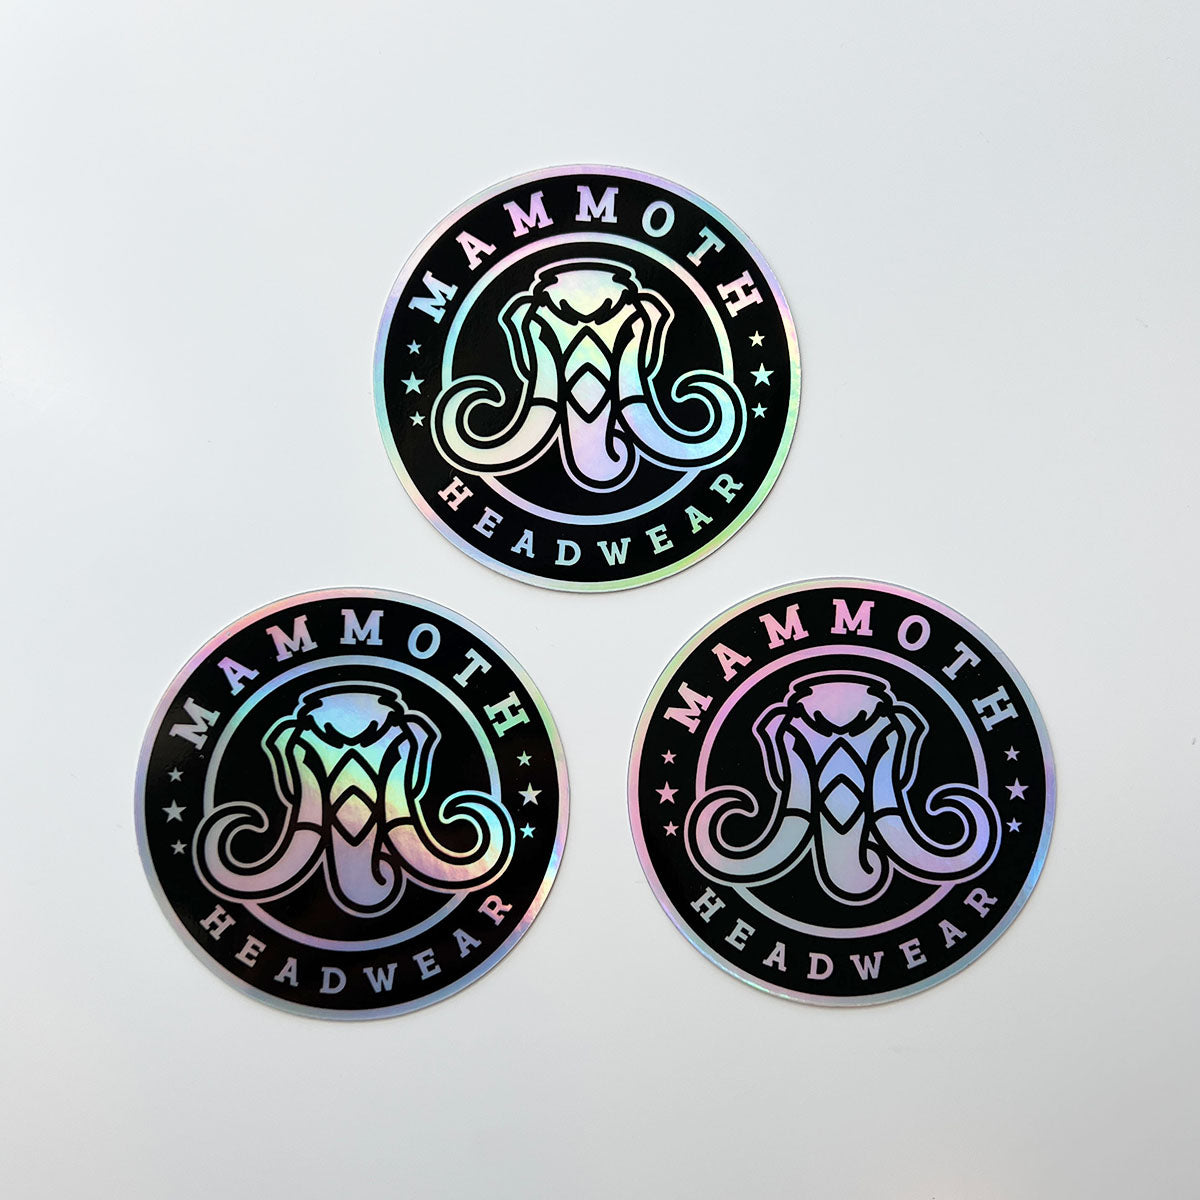 Classic Holographic sticker pack